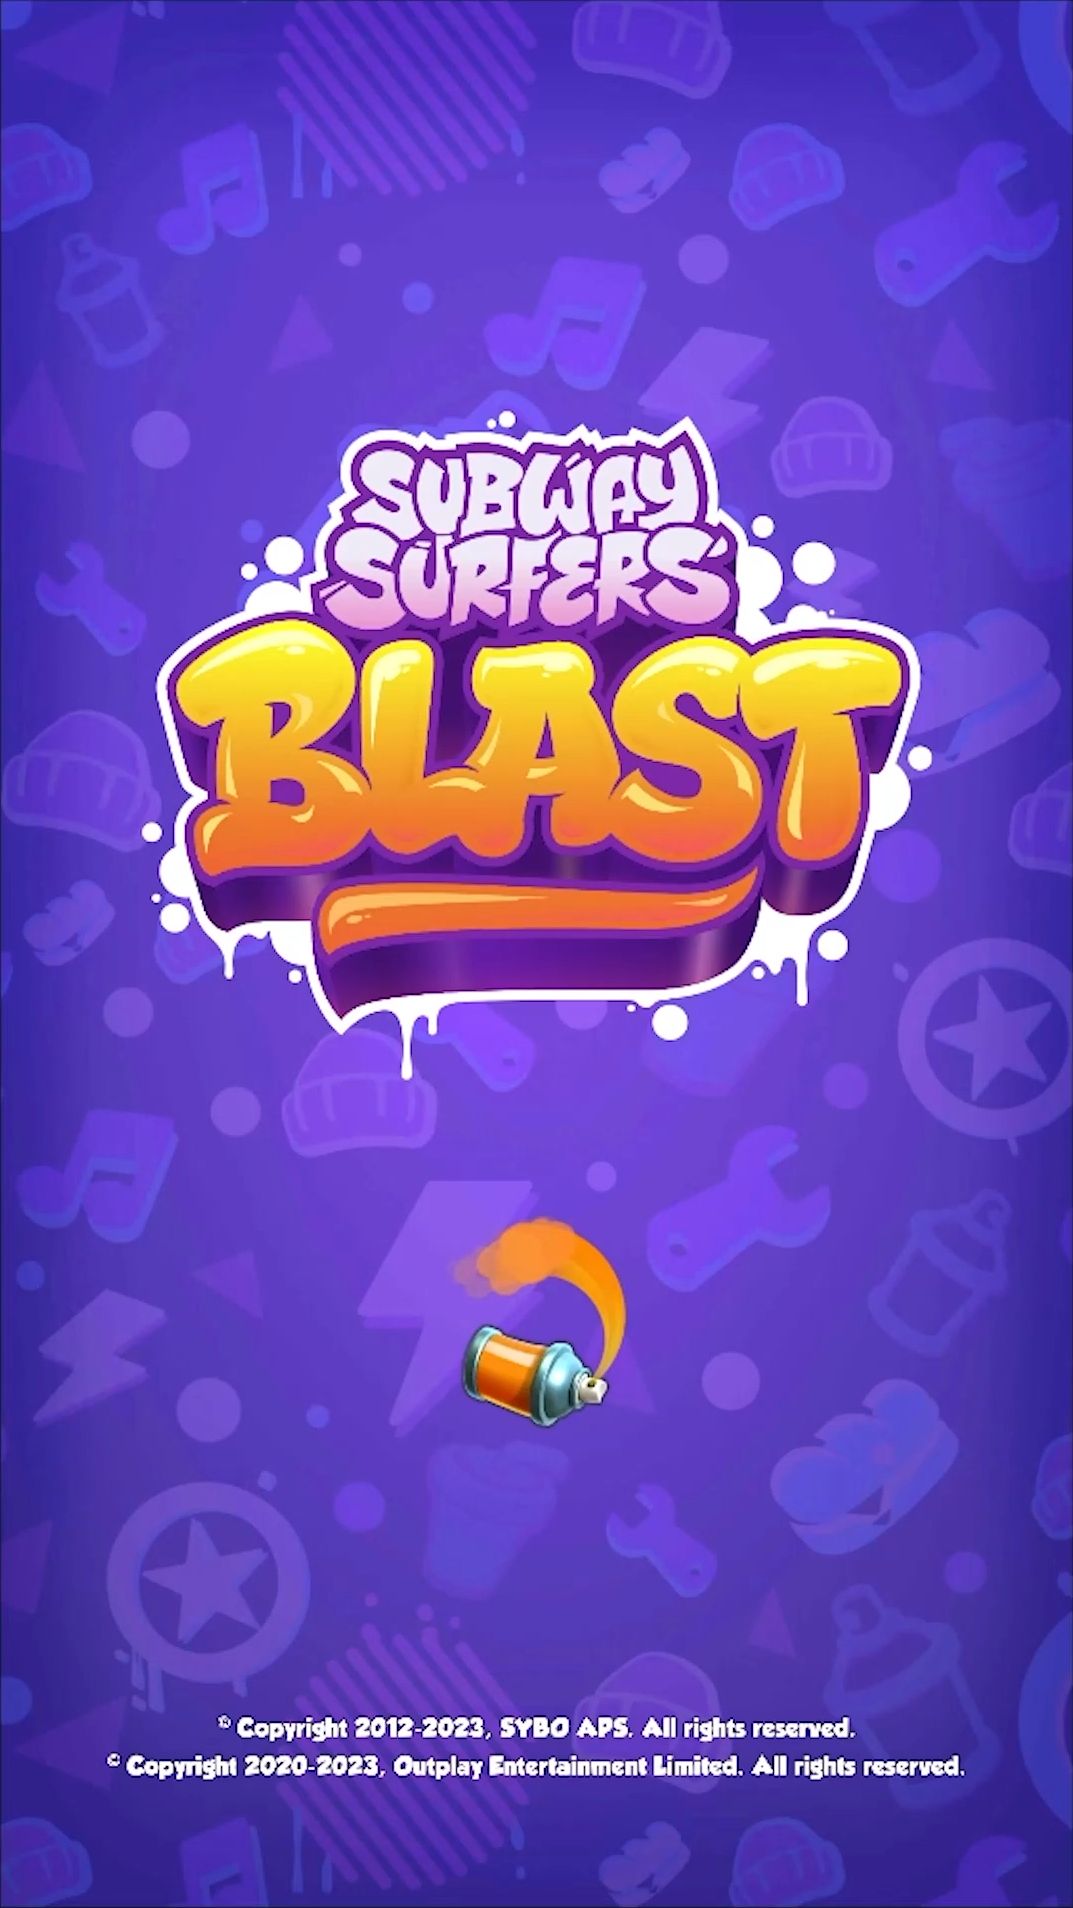 Full version of Android Match 3 game apk Subway Surfers Blast for tablet and phone.